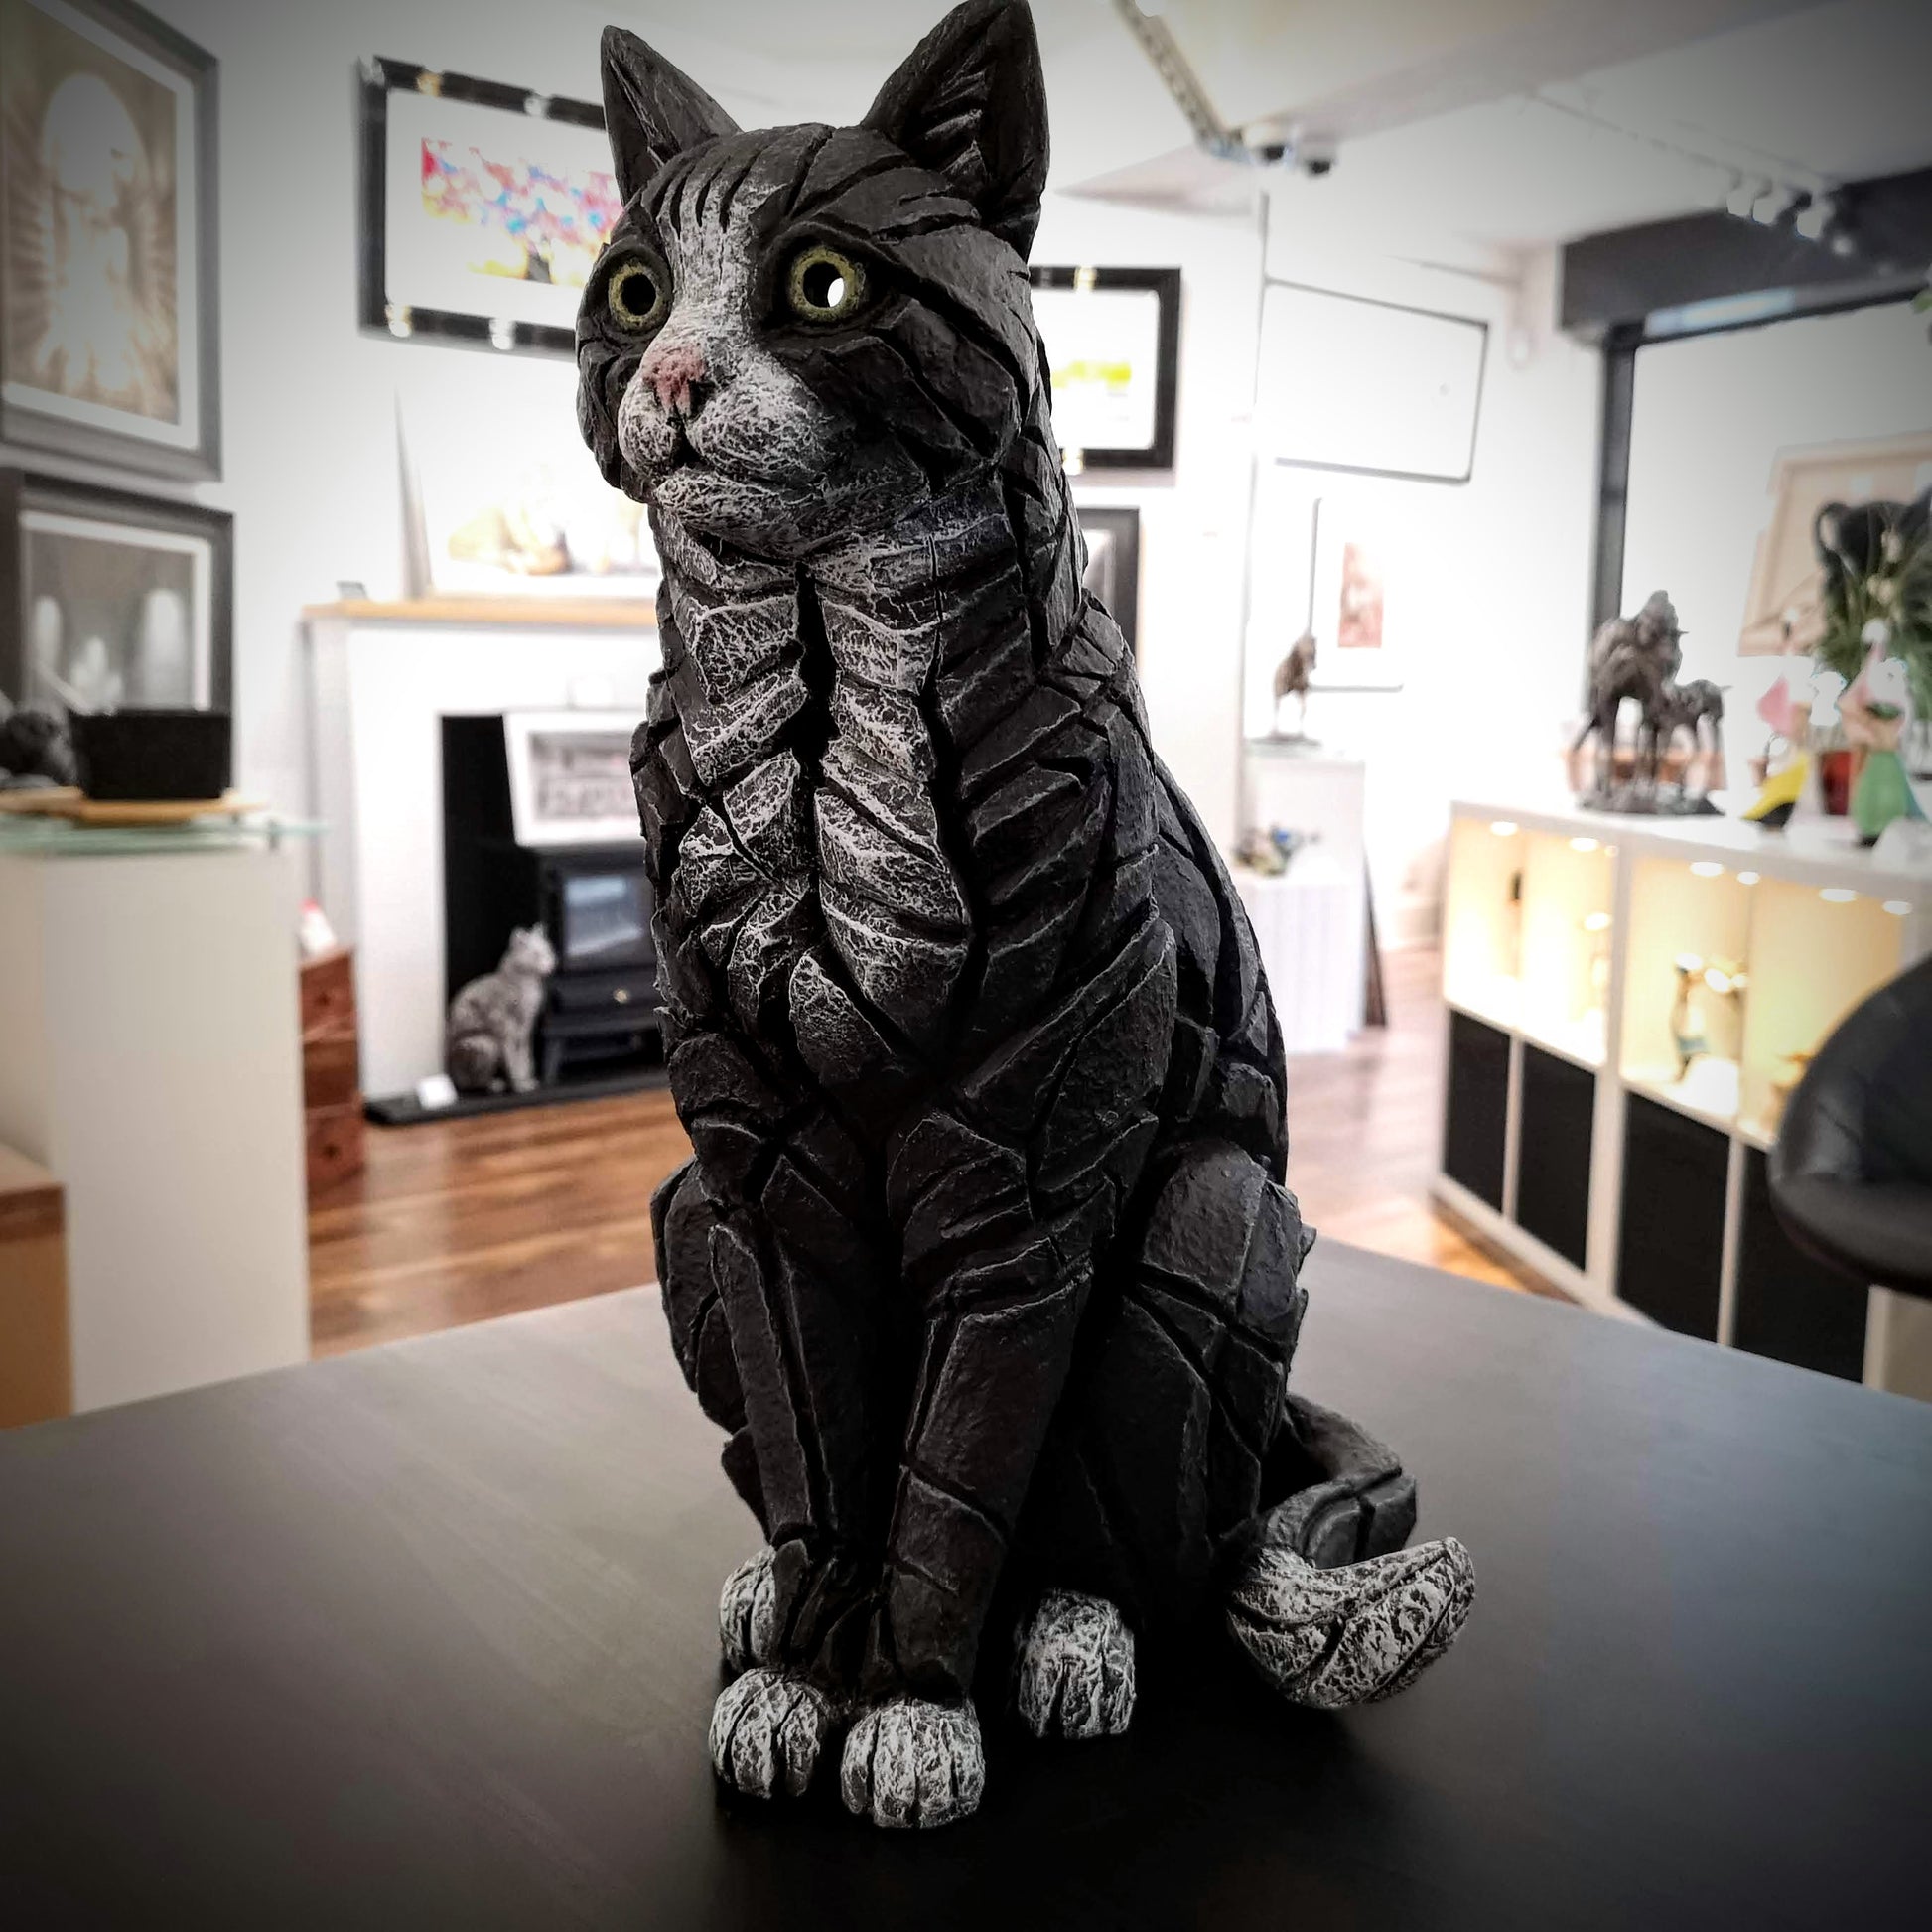 Cat Sitting Black and White Artworx Gallery by Edge Sculpture